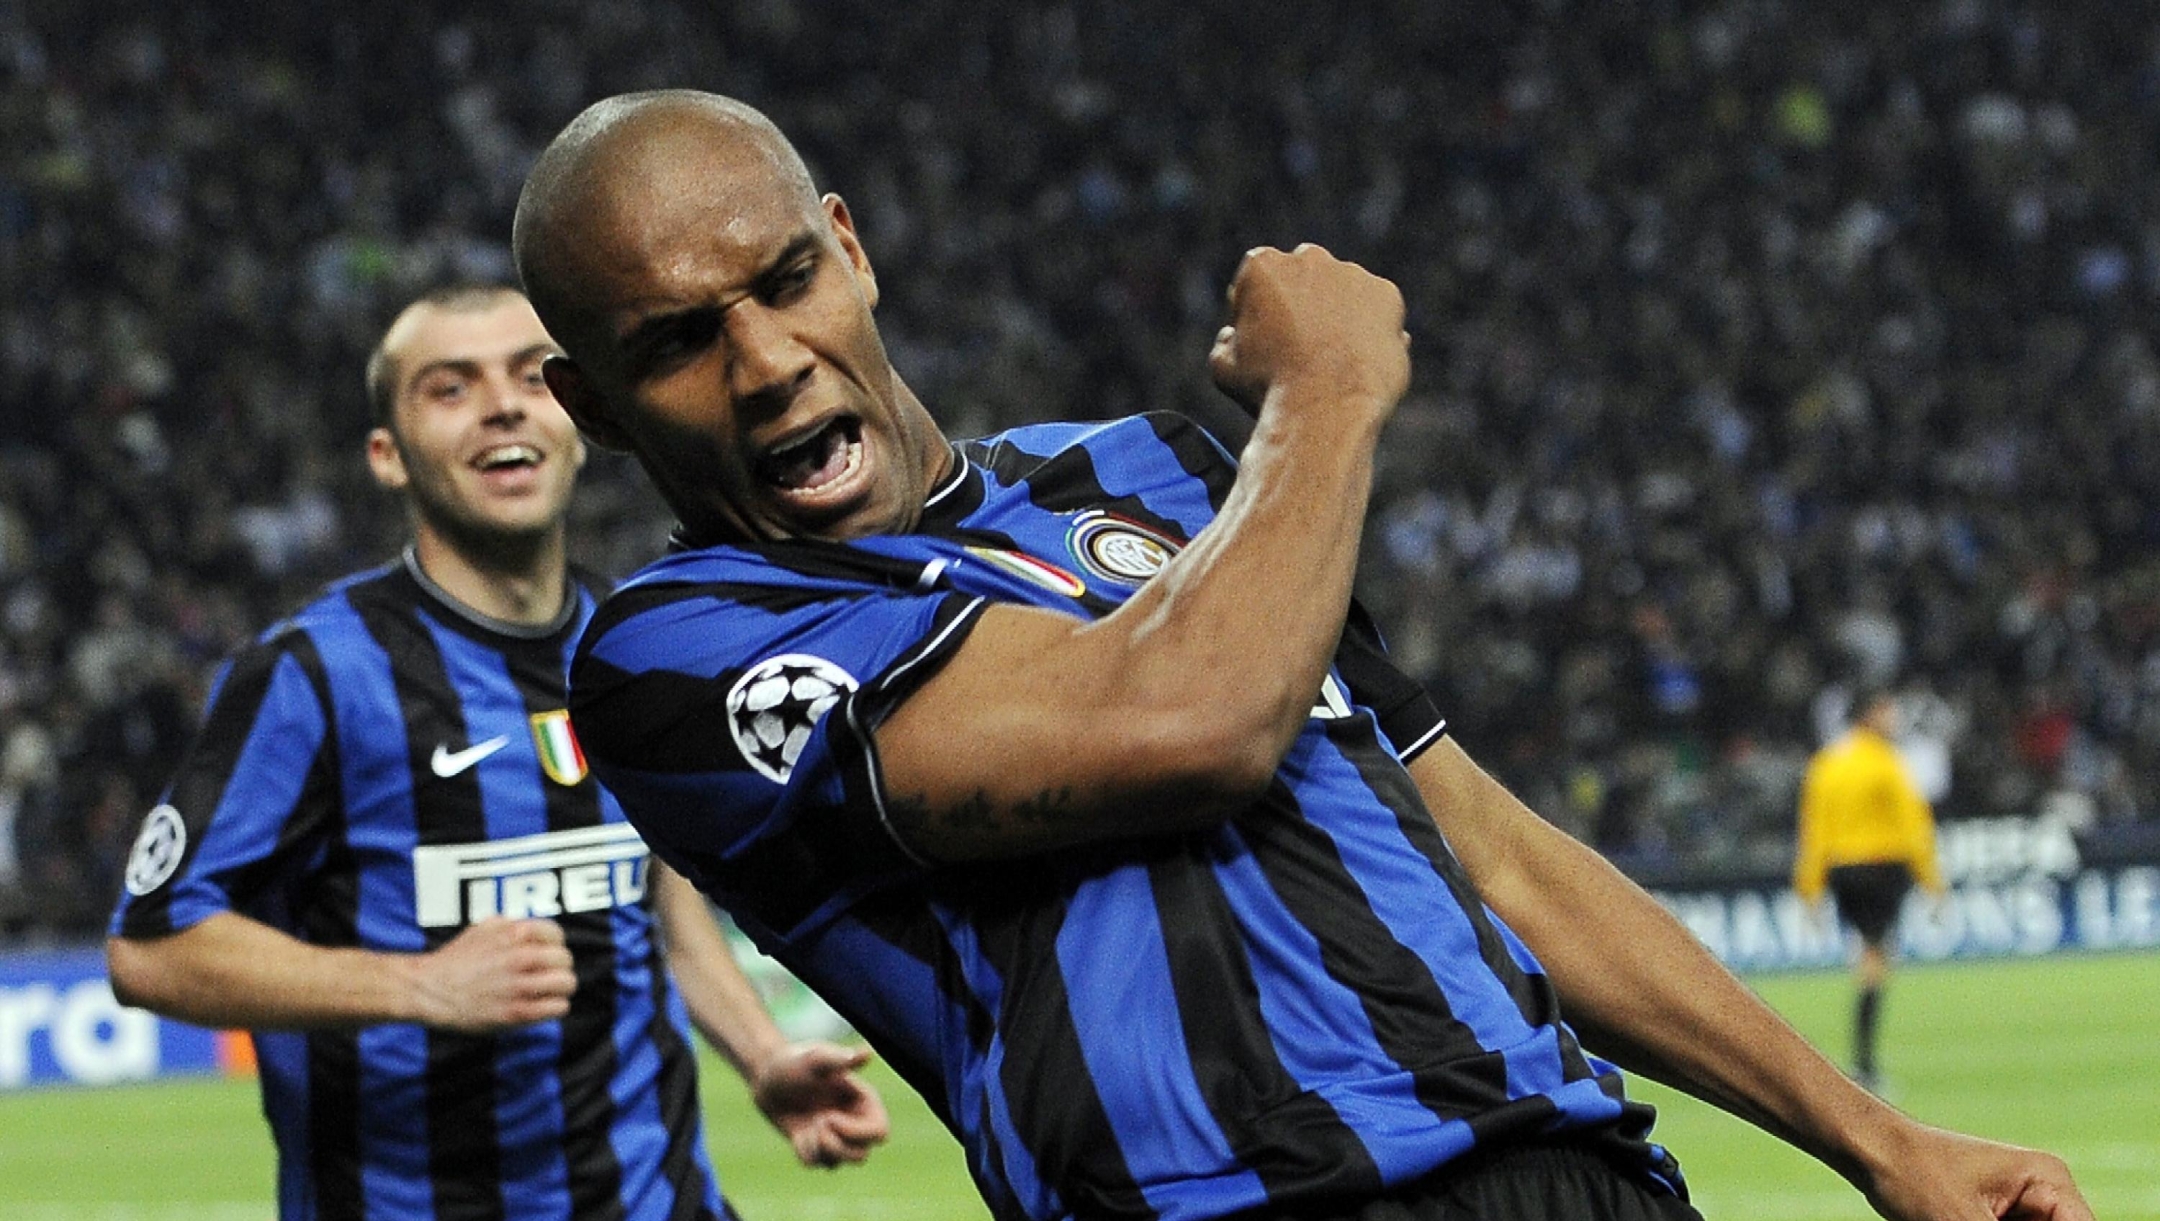 epa02125458 Inter Milan's Maicon (R) celebrates after scoring watched by teammates Pandev (L) during the Champions League semi final, first leg, soccer match, Inter Milan vs FC Barcelona, held at the Meazza stadium, in Milan, Italy on 20 April 2010.  EPA/DANIEL DAL ZENNARO